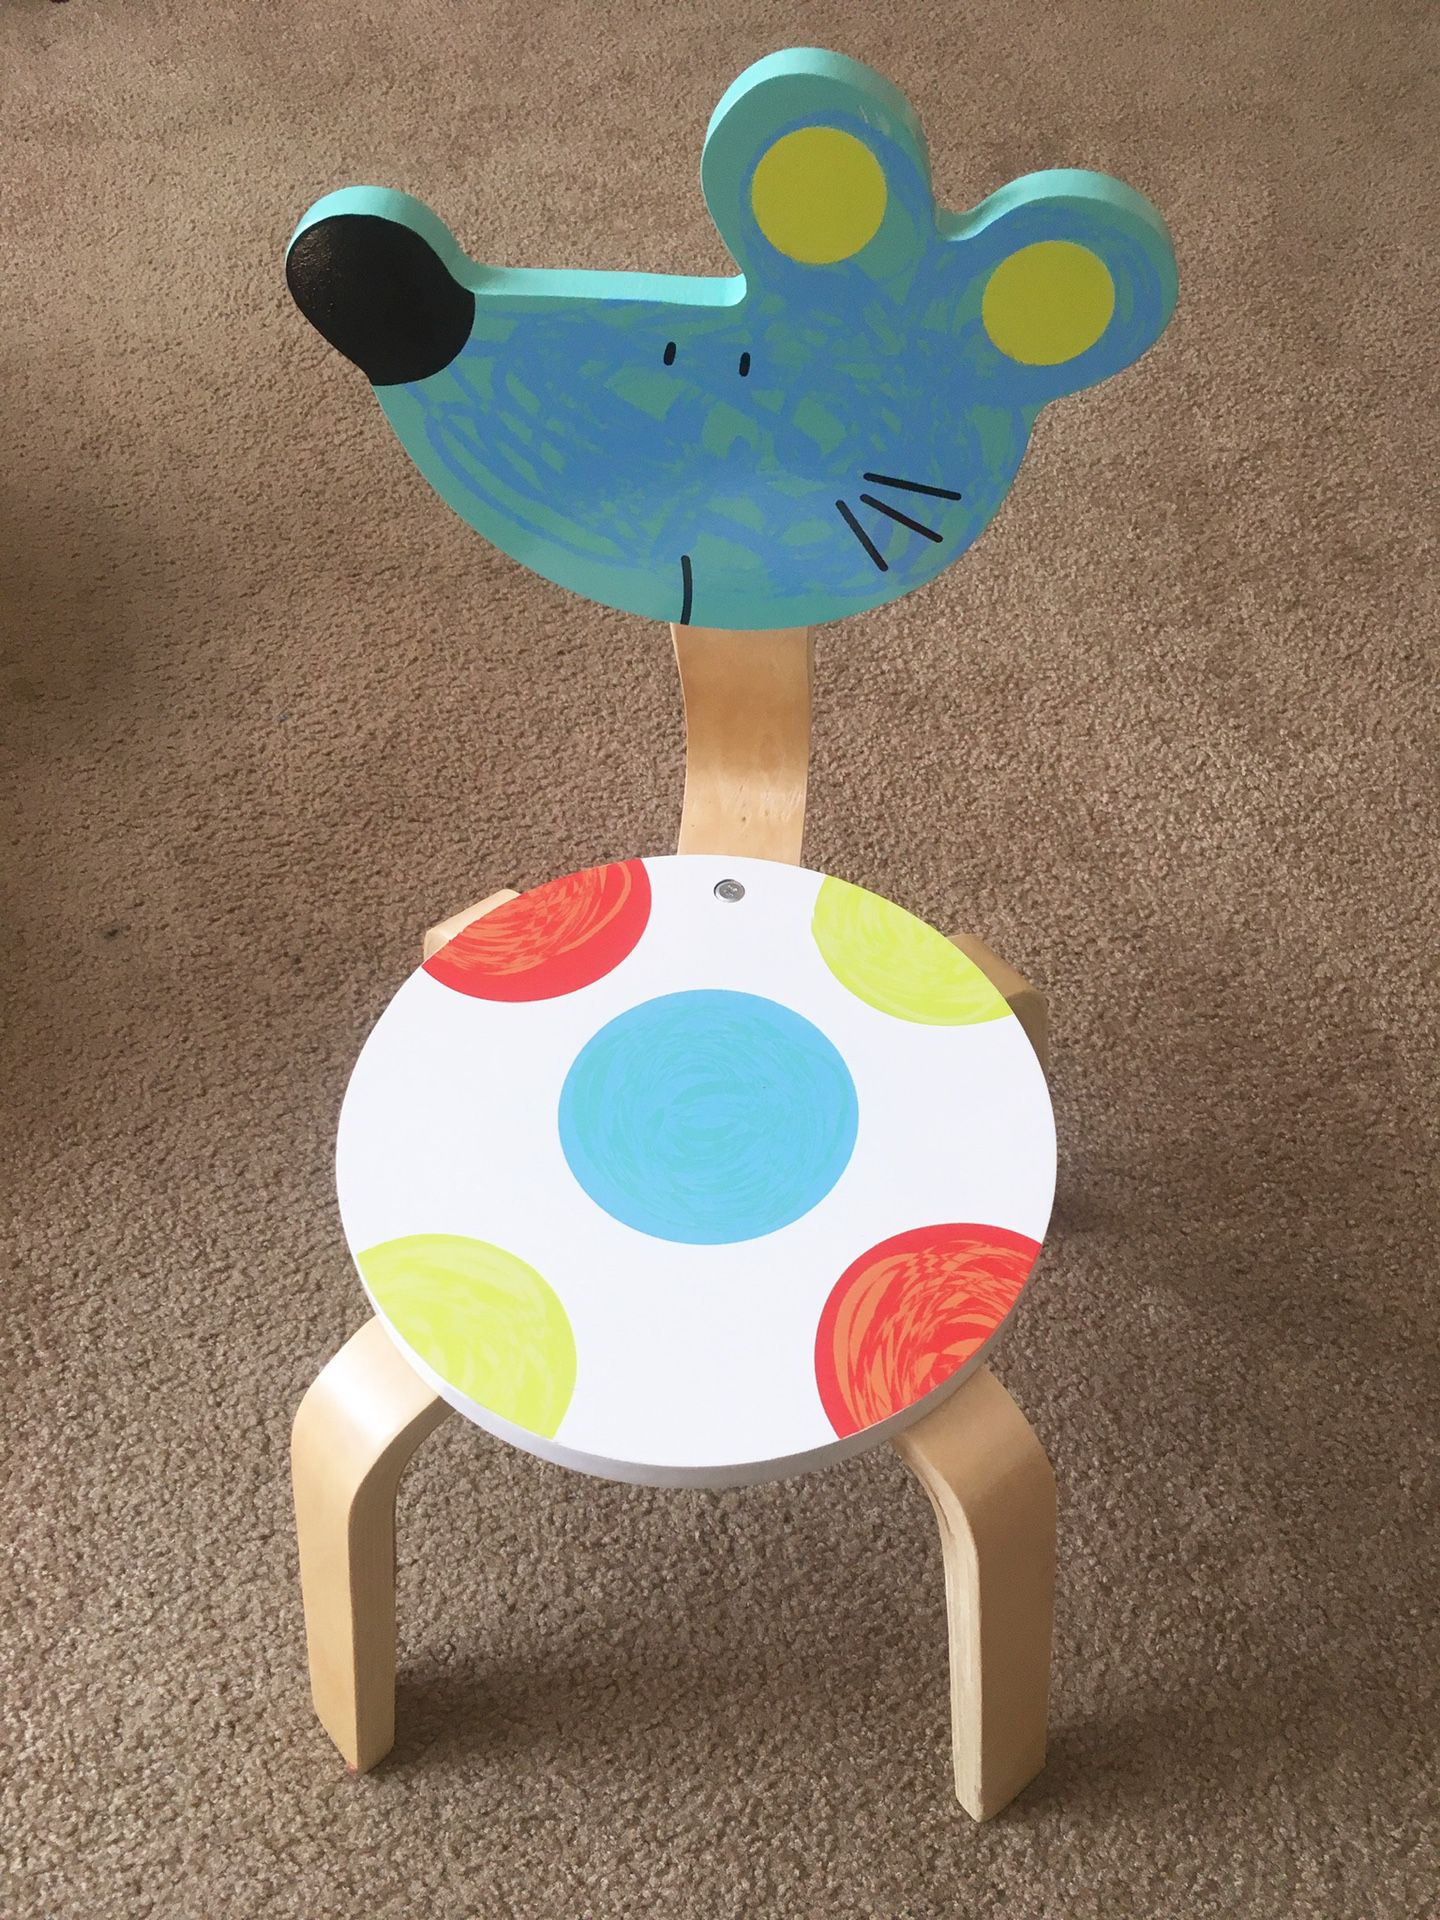 Children’s chair set: while table + animal chairs